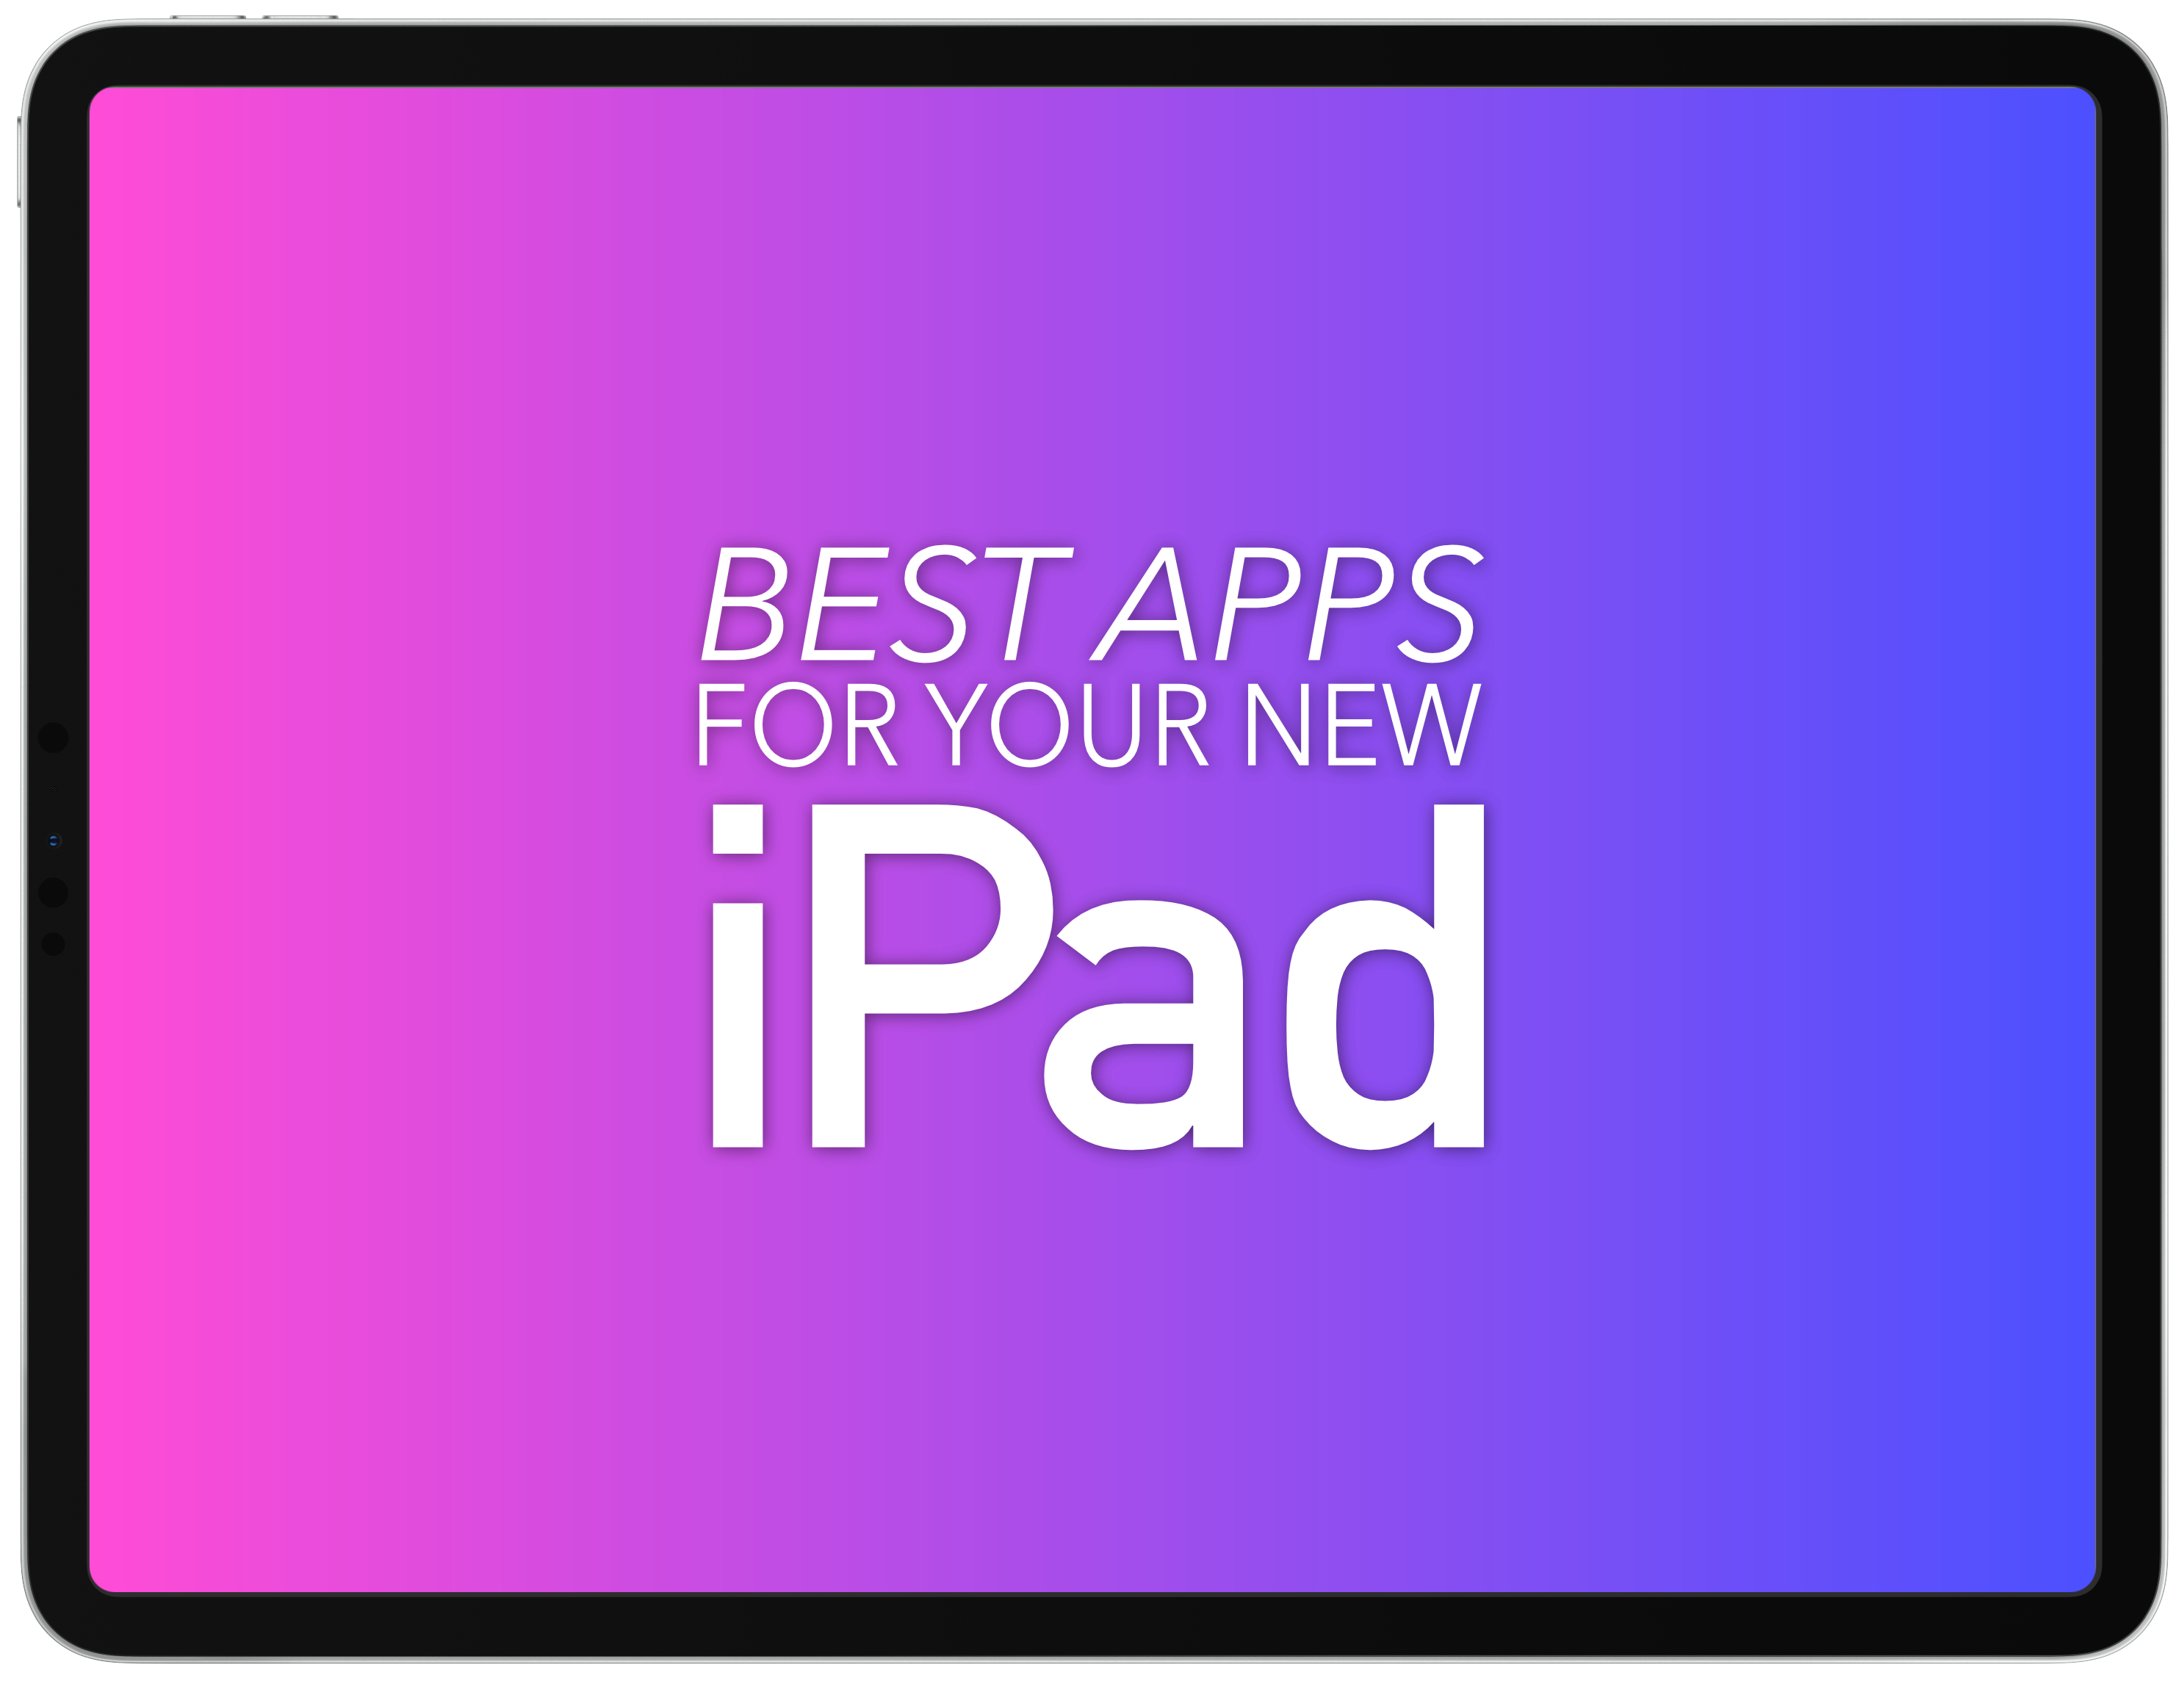 Best apps for your new iPad